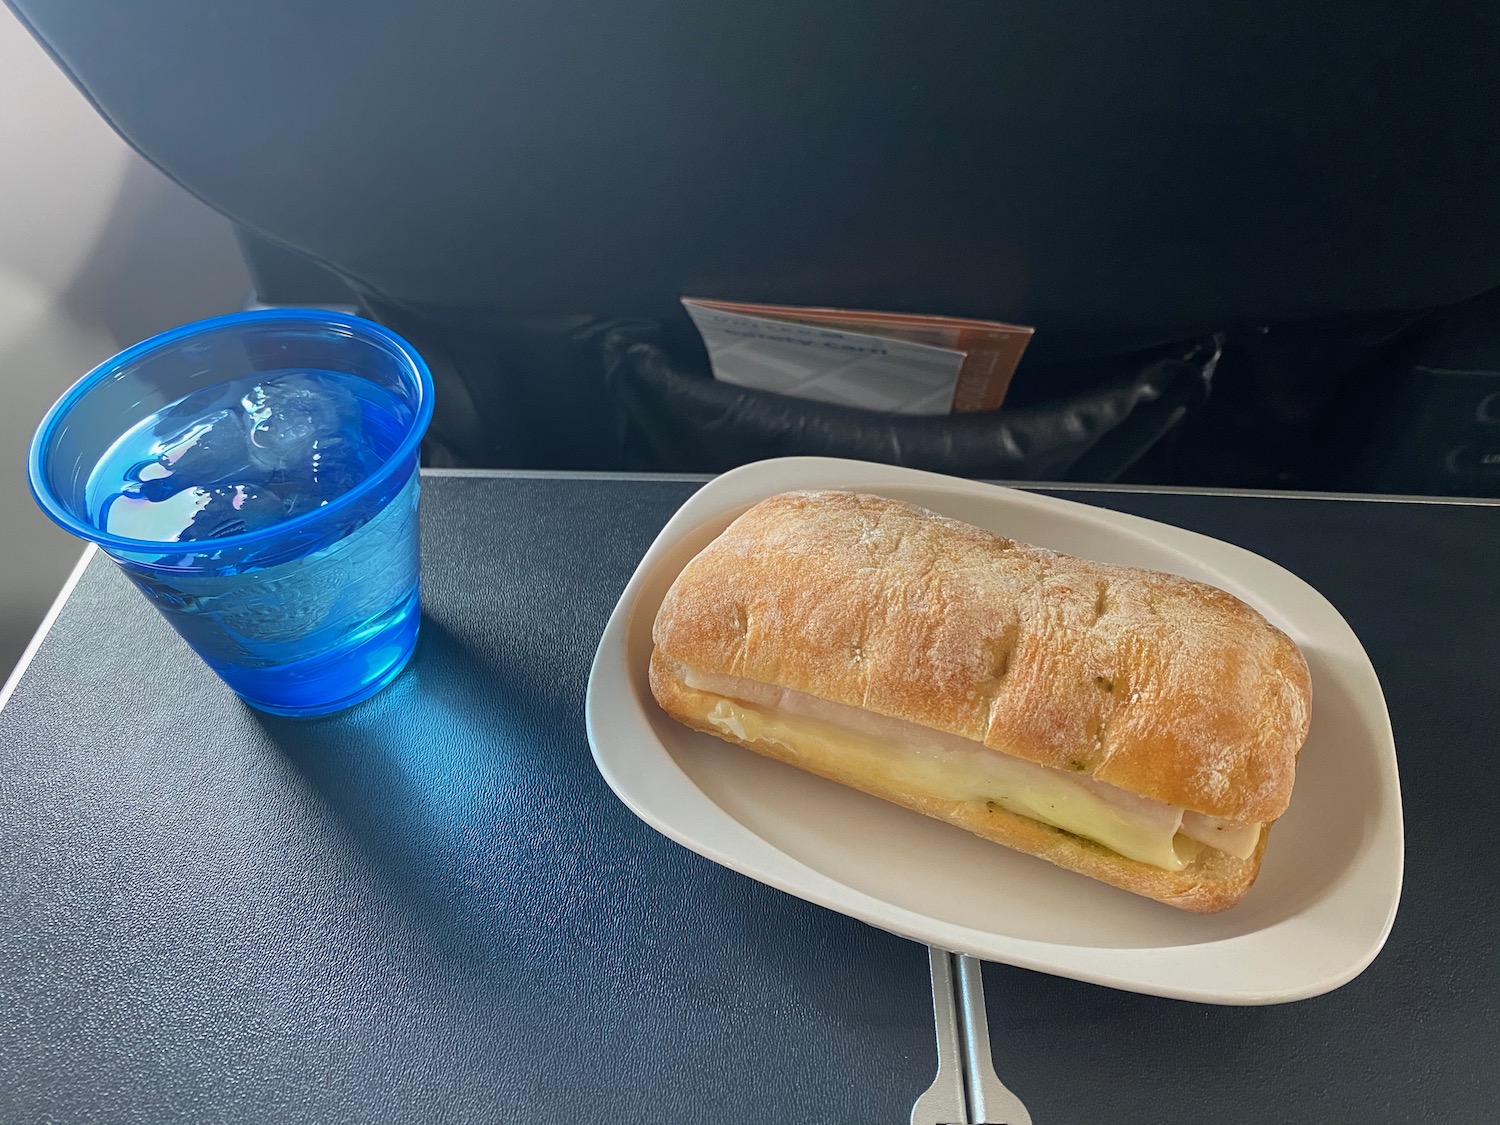 a sandwich on a plate next to a cup of water